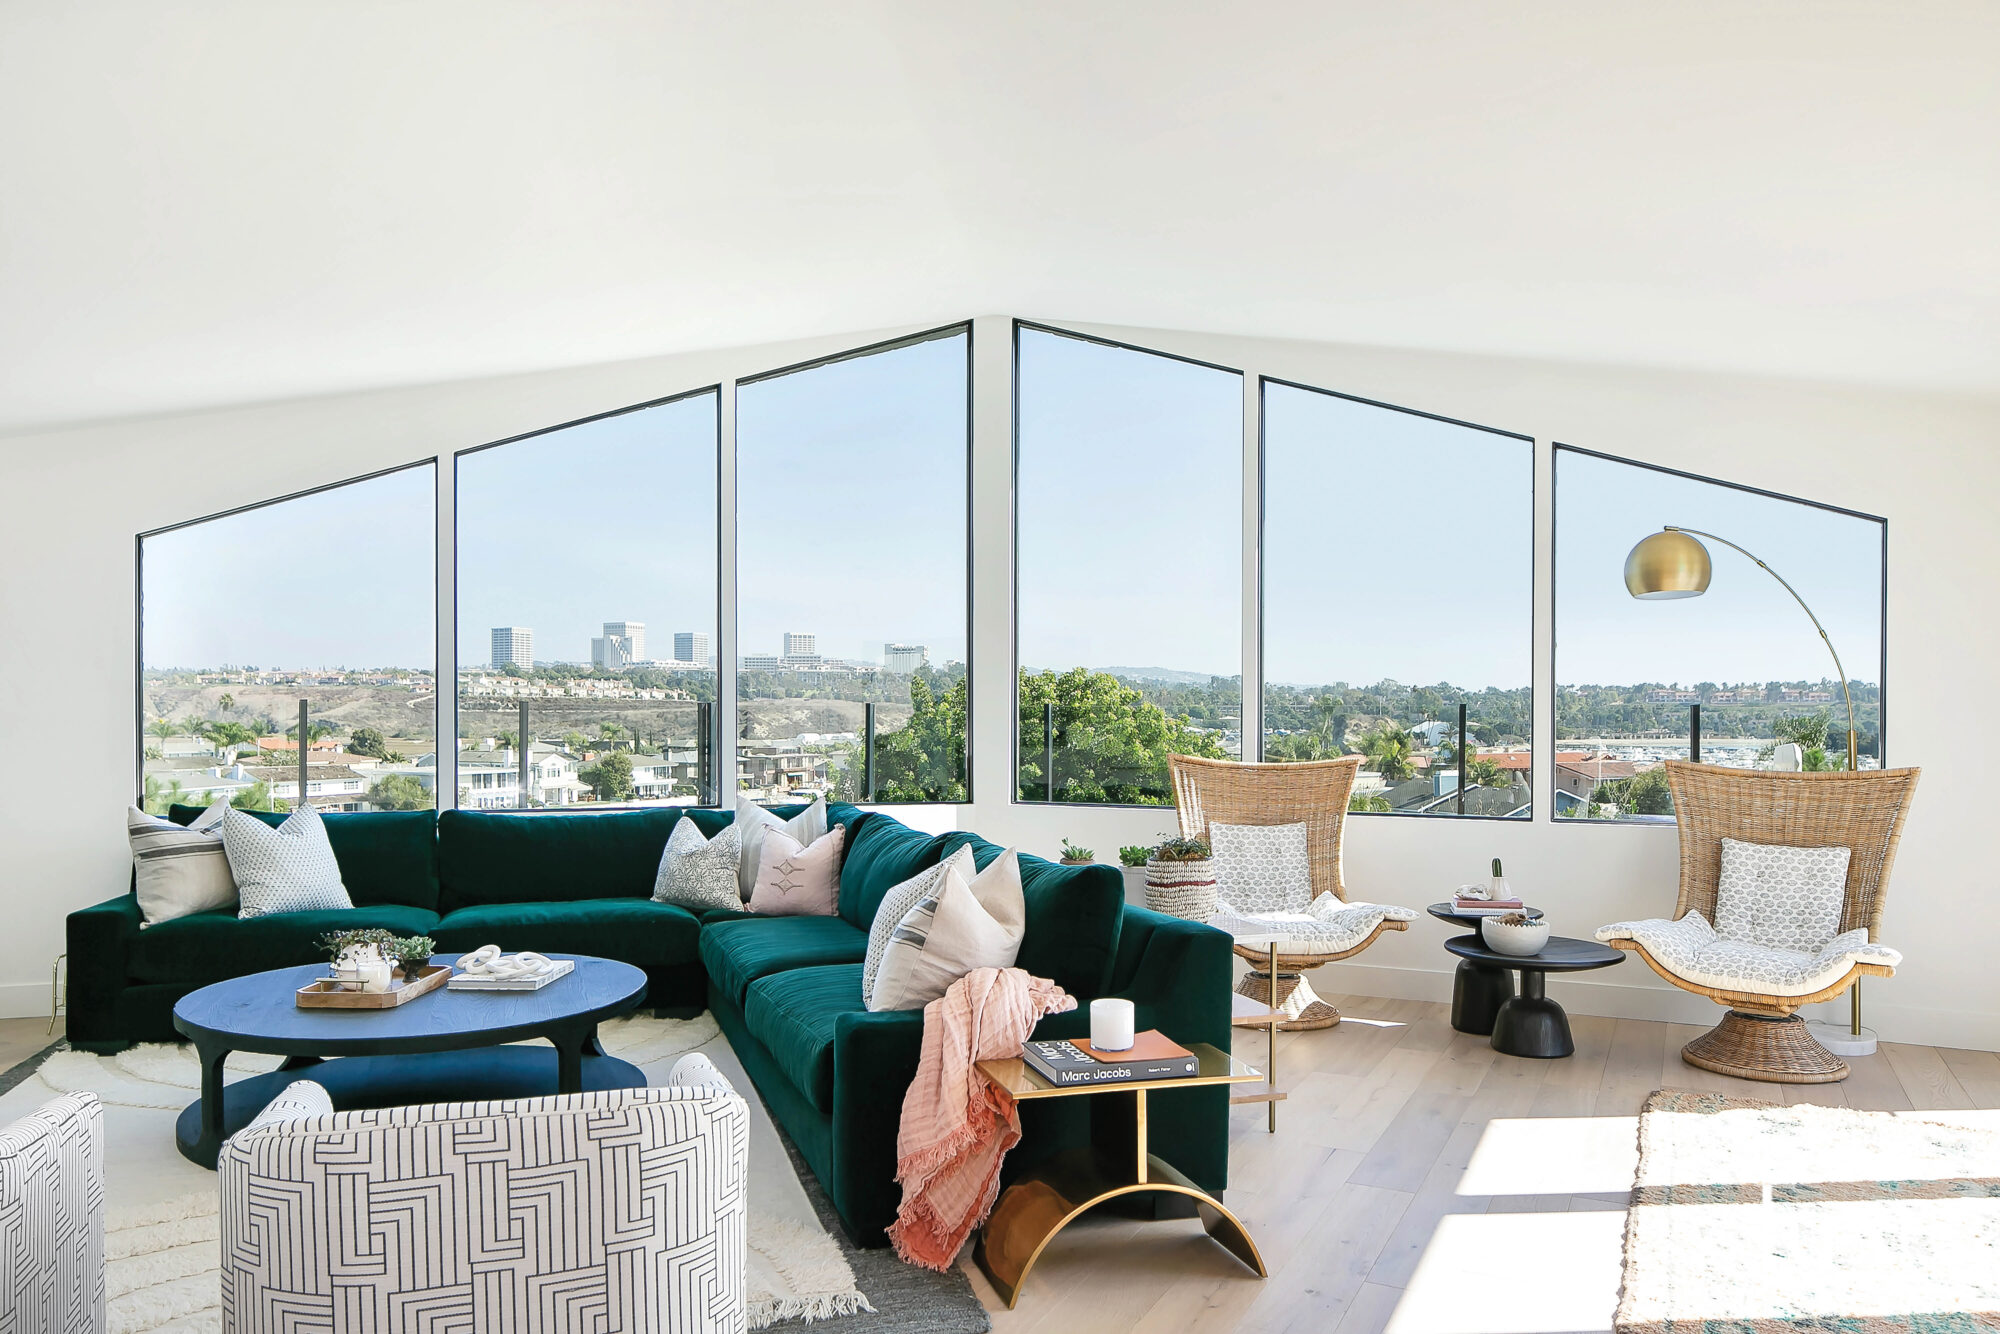 Living room with view facing city and large green couch prominently shown.